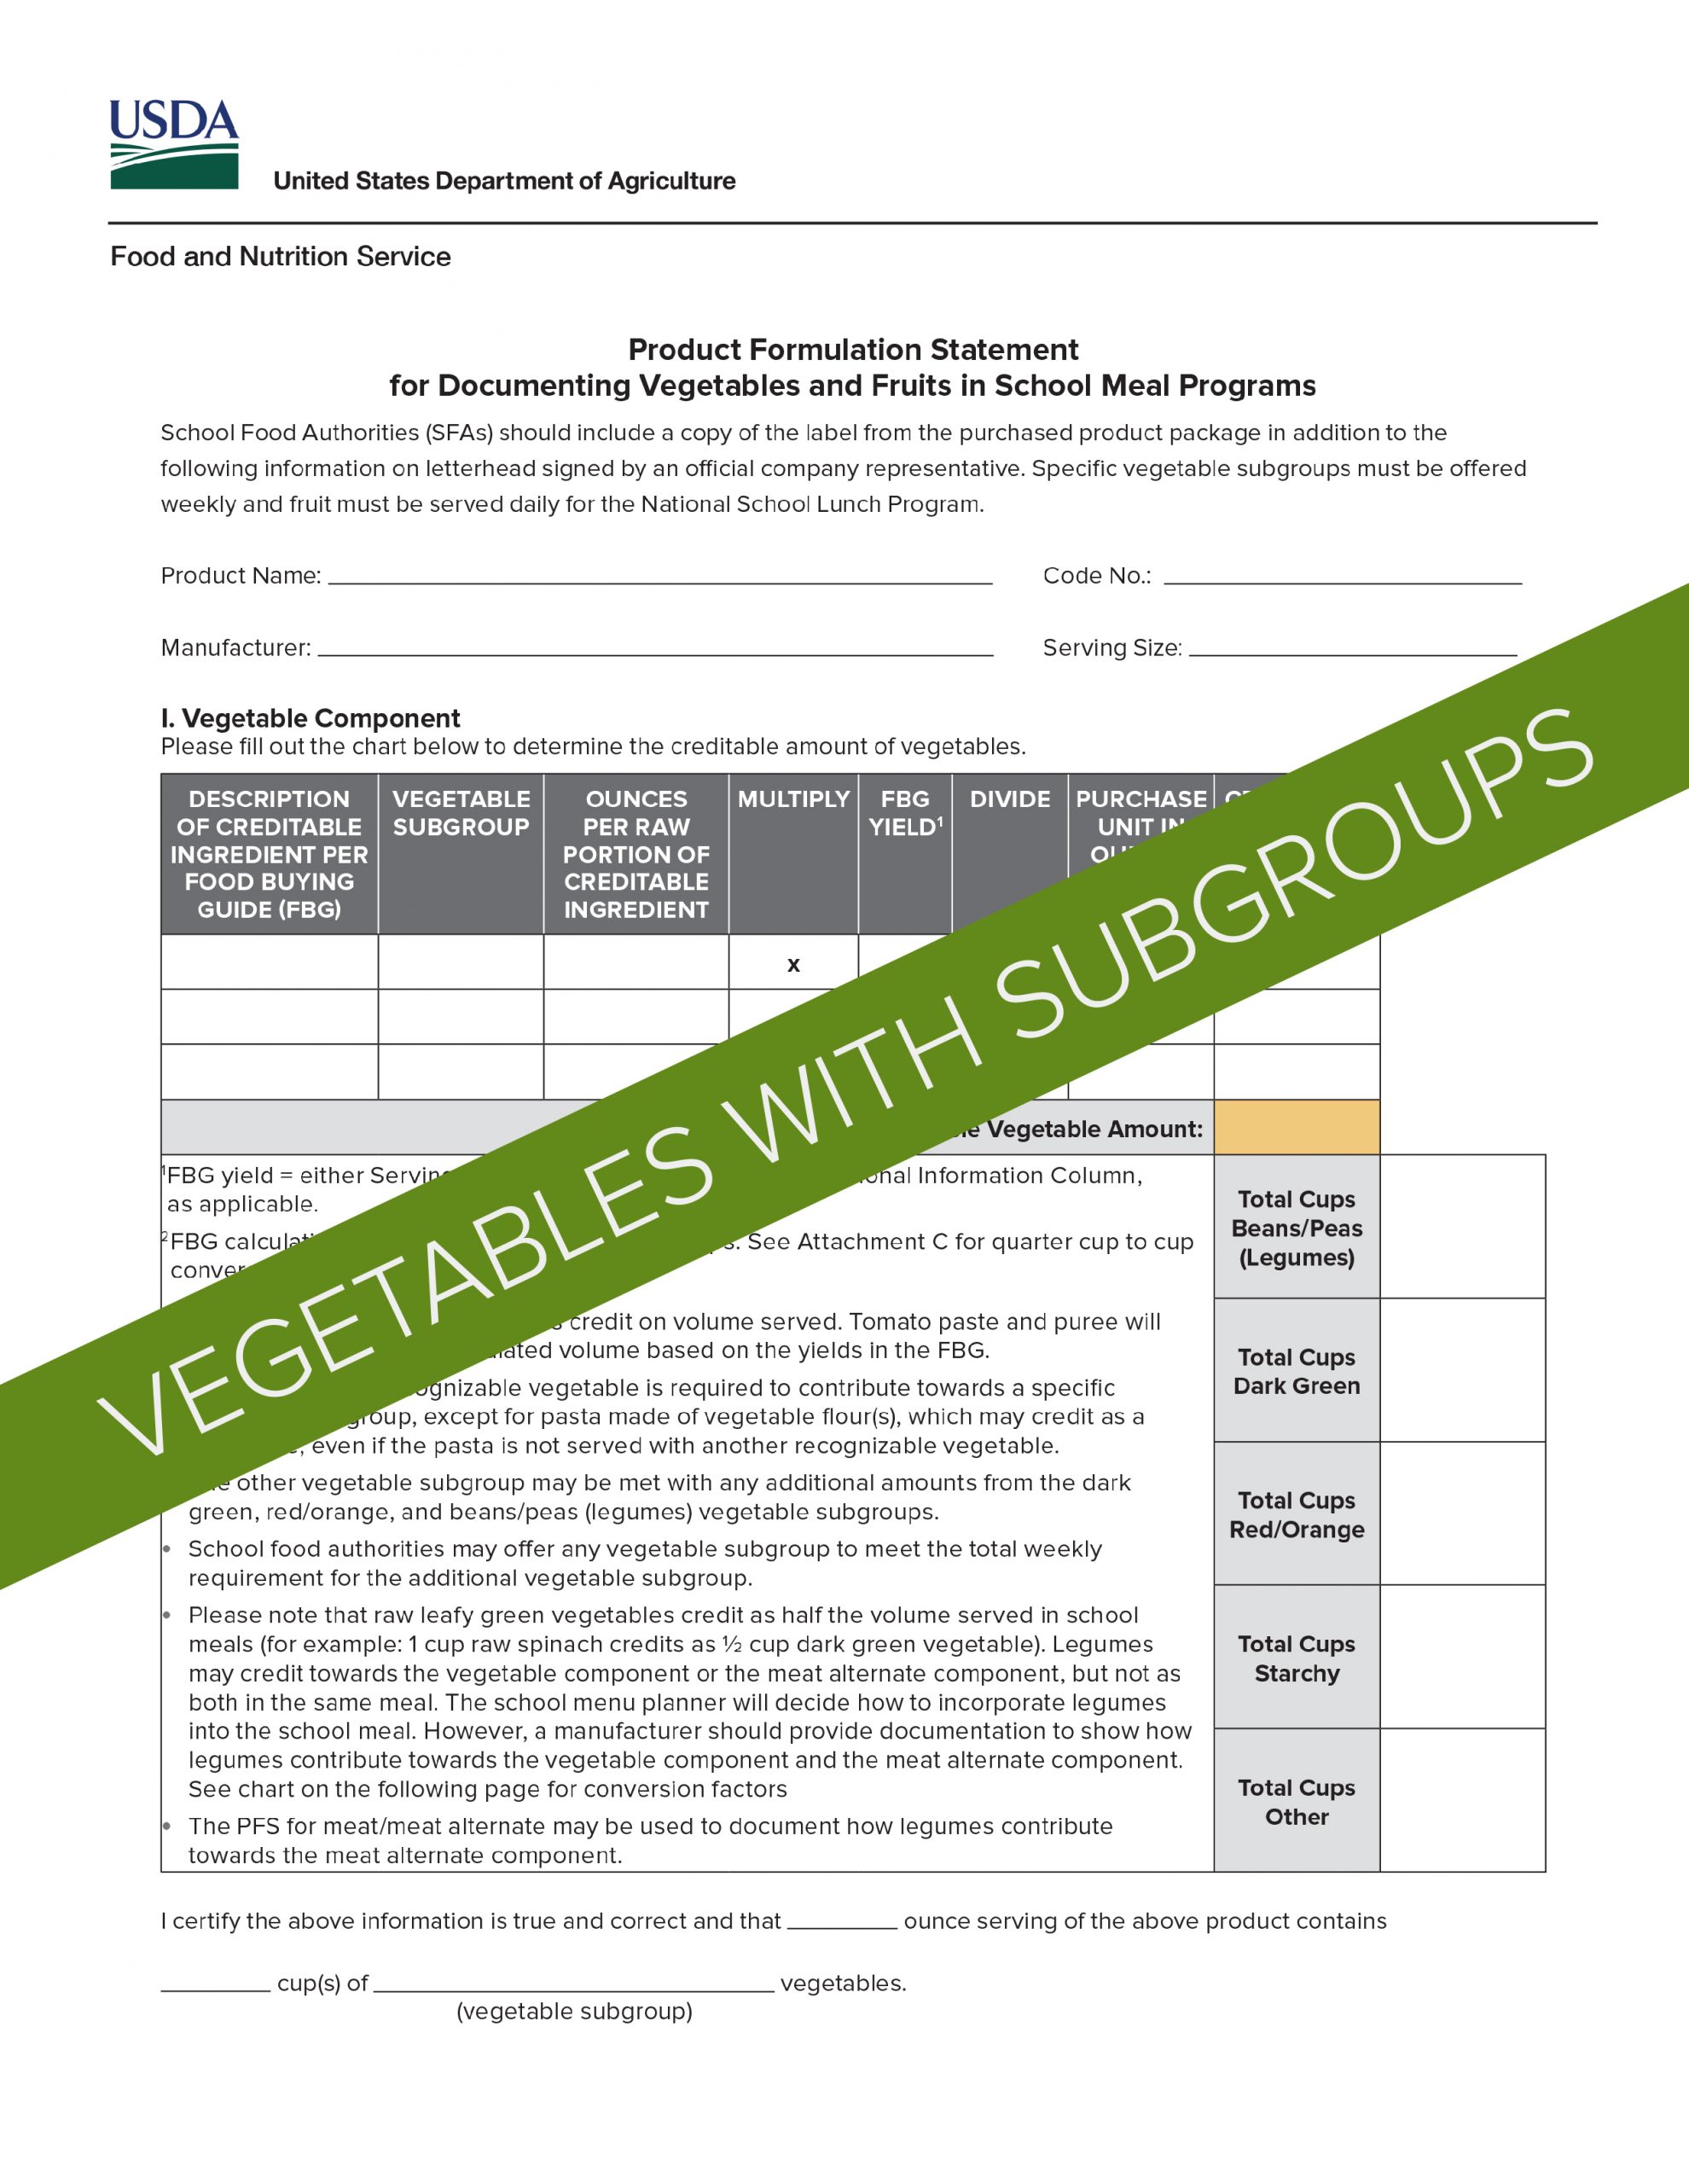 USDA Product Formulation Statement Template for Vegetables with Subgroups/Fruit